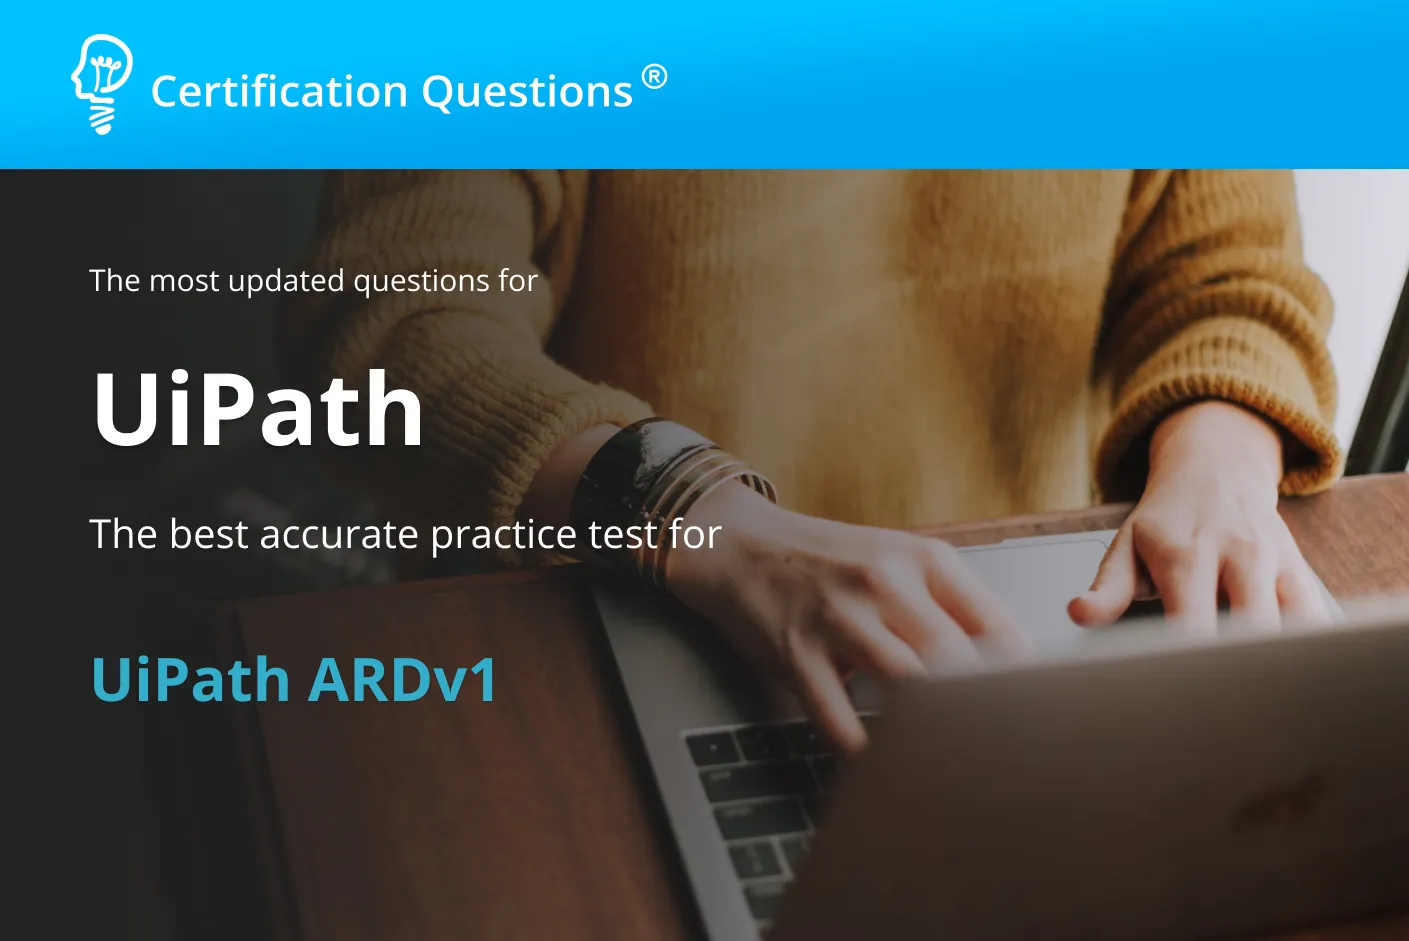 This image is related to Uipath Practice Test in USA